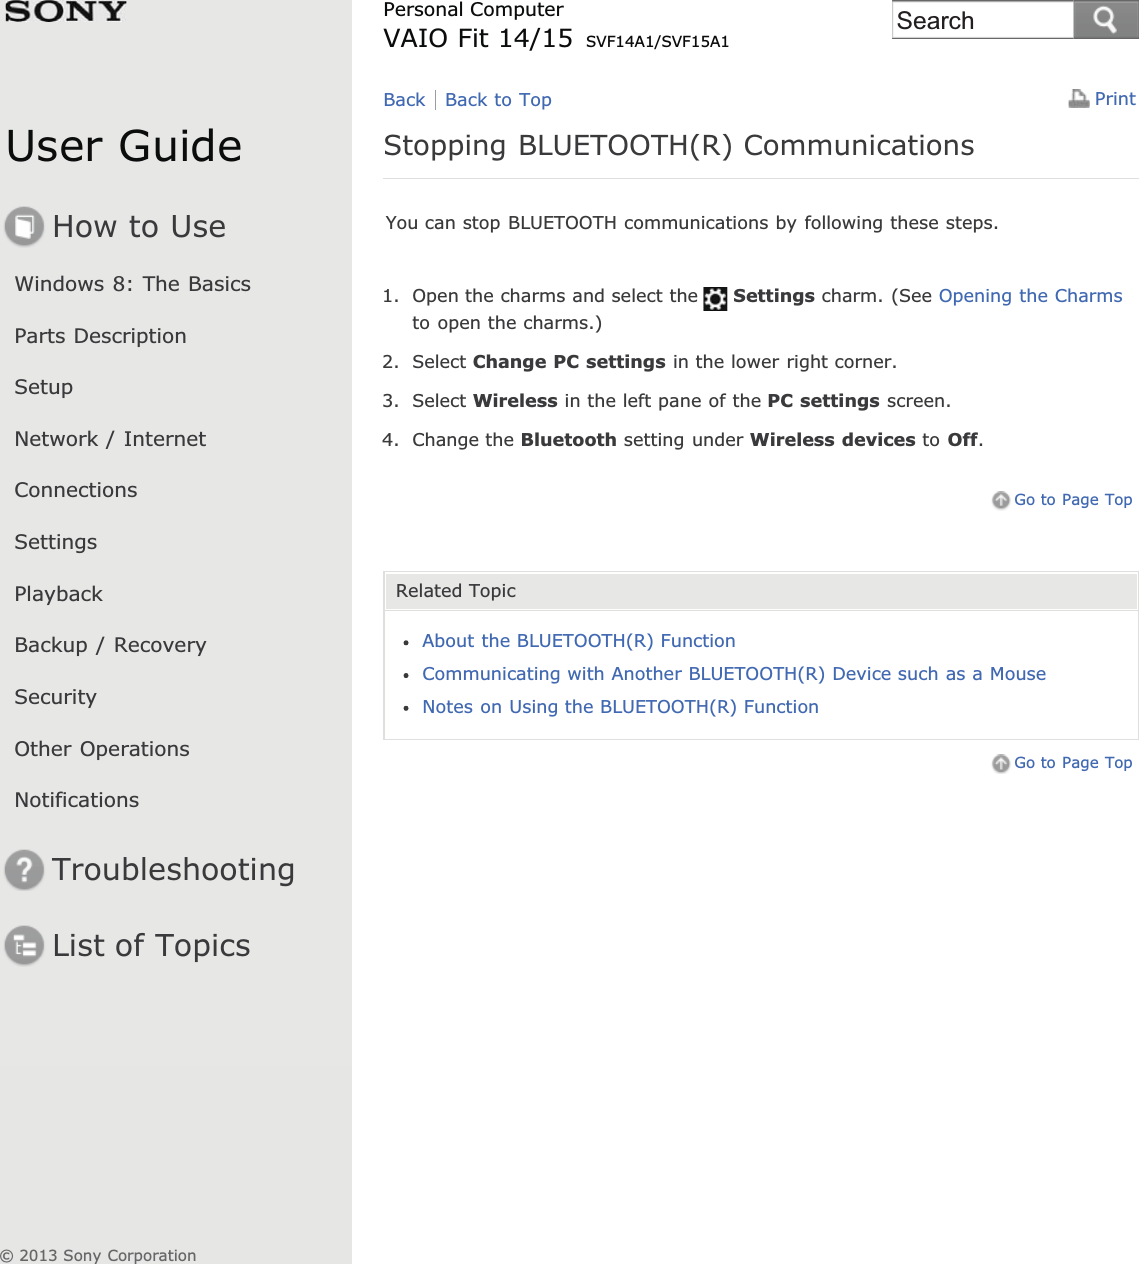 User GuideHow to UseWindows 8: The BasicsParts DescriptionSetupNetwork / InternetConnectionsSettingsPlaybackBackup / RecoverySecurityOther OperationsNotificationsTroubleshootingList of TopicsPrintPersonal ComputerVAIO Fit 14/15 SVF14A1/SVF15A1Stopping BLUETOOTH(R) CommunicationsYou can stop BLUETOOTH communications by following these steps.1. Open the charms and select the Settings charm. (See Opening the Charmsto open the charms.)2. Select Change PC settings in the lower right corner.3. Select Wireless in the left pane of the PC settings screen.4. Change the Bluetooth setting under Wireless devices to Off.Go to Page TopRelated TopicAbout the BLUETOOTH(R) FunctionCommunicating with Another BLUETOOTH(R) Device such as a MouseNotes on Using the BLUETOOTH(R) FunctionGo to Page TopBack Back to Top© 2013 Sony CorporationSearch